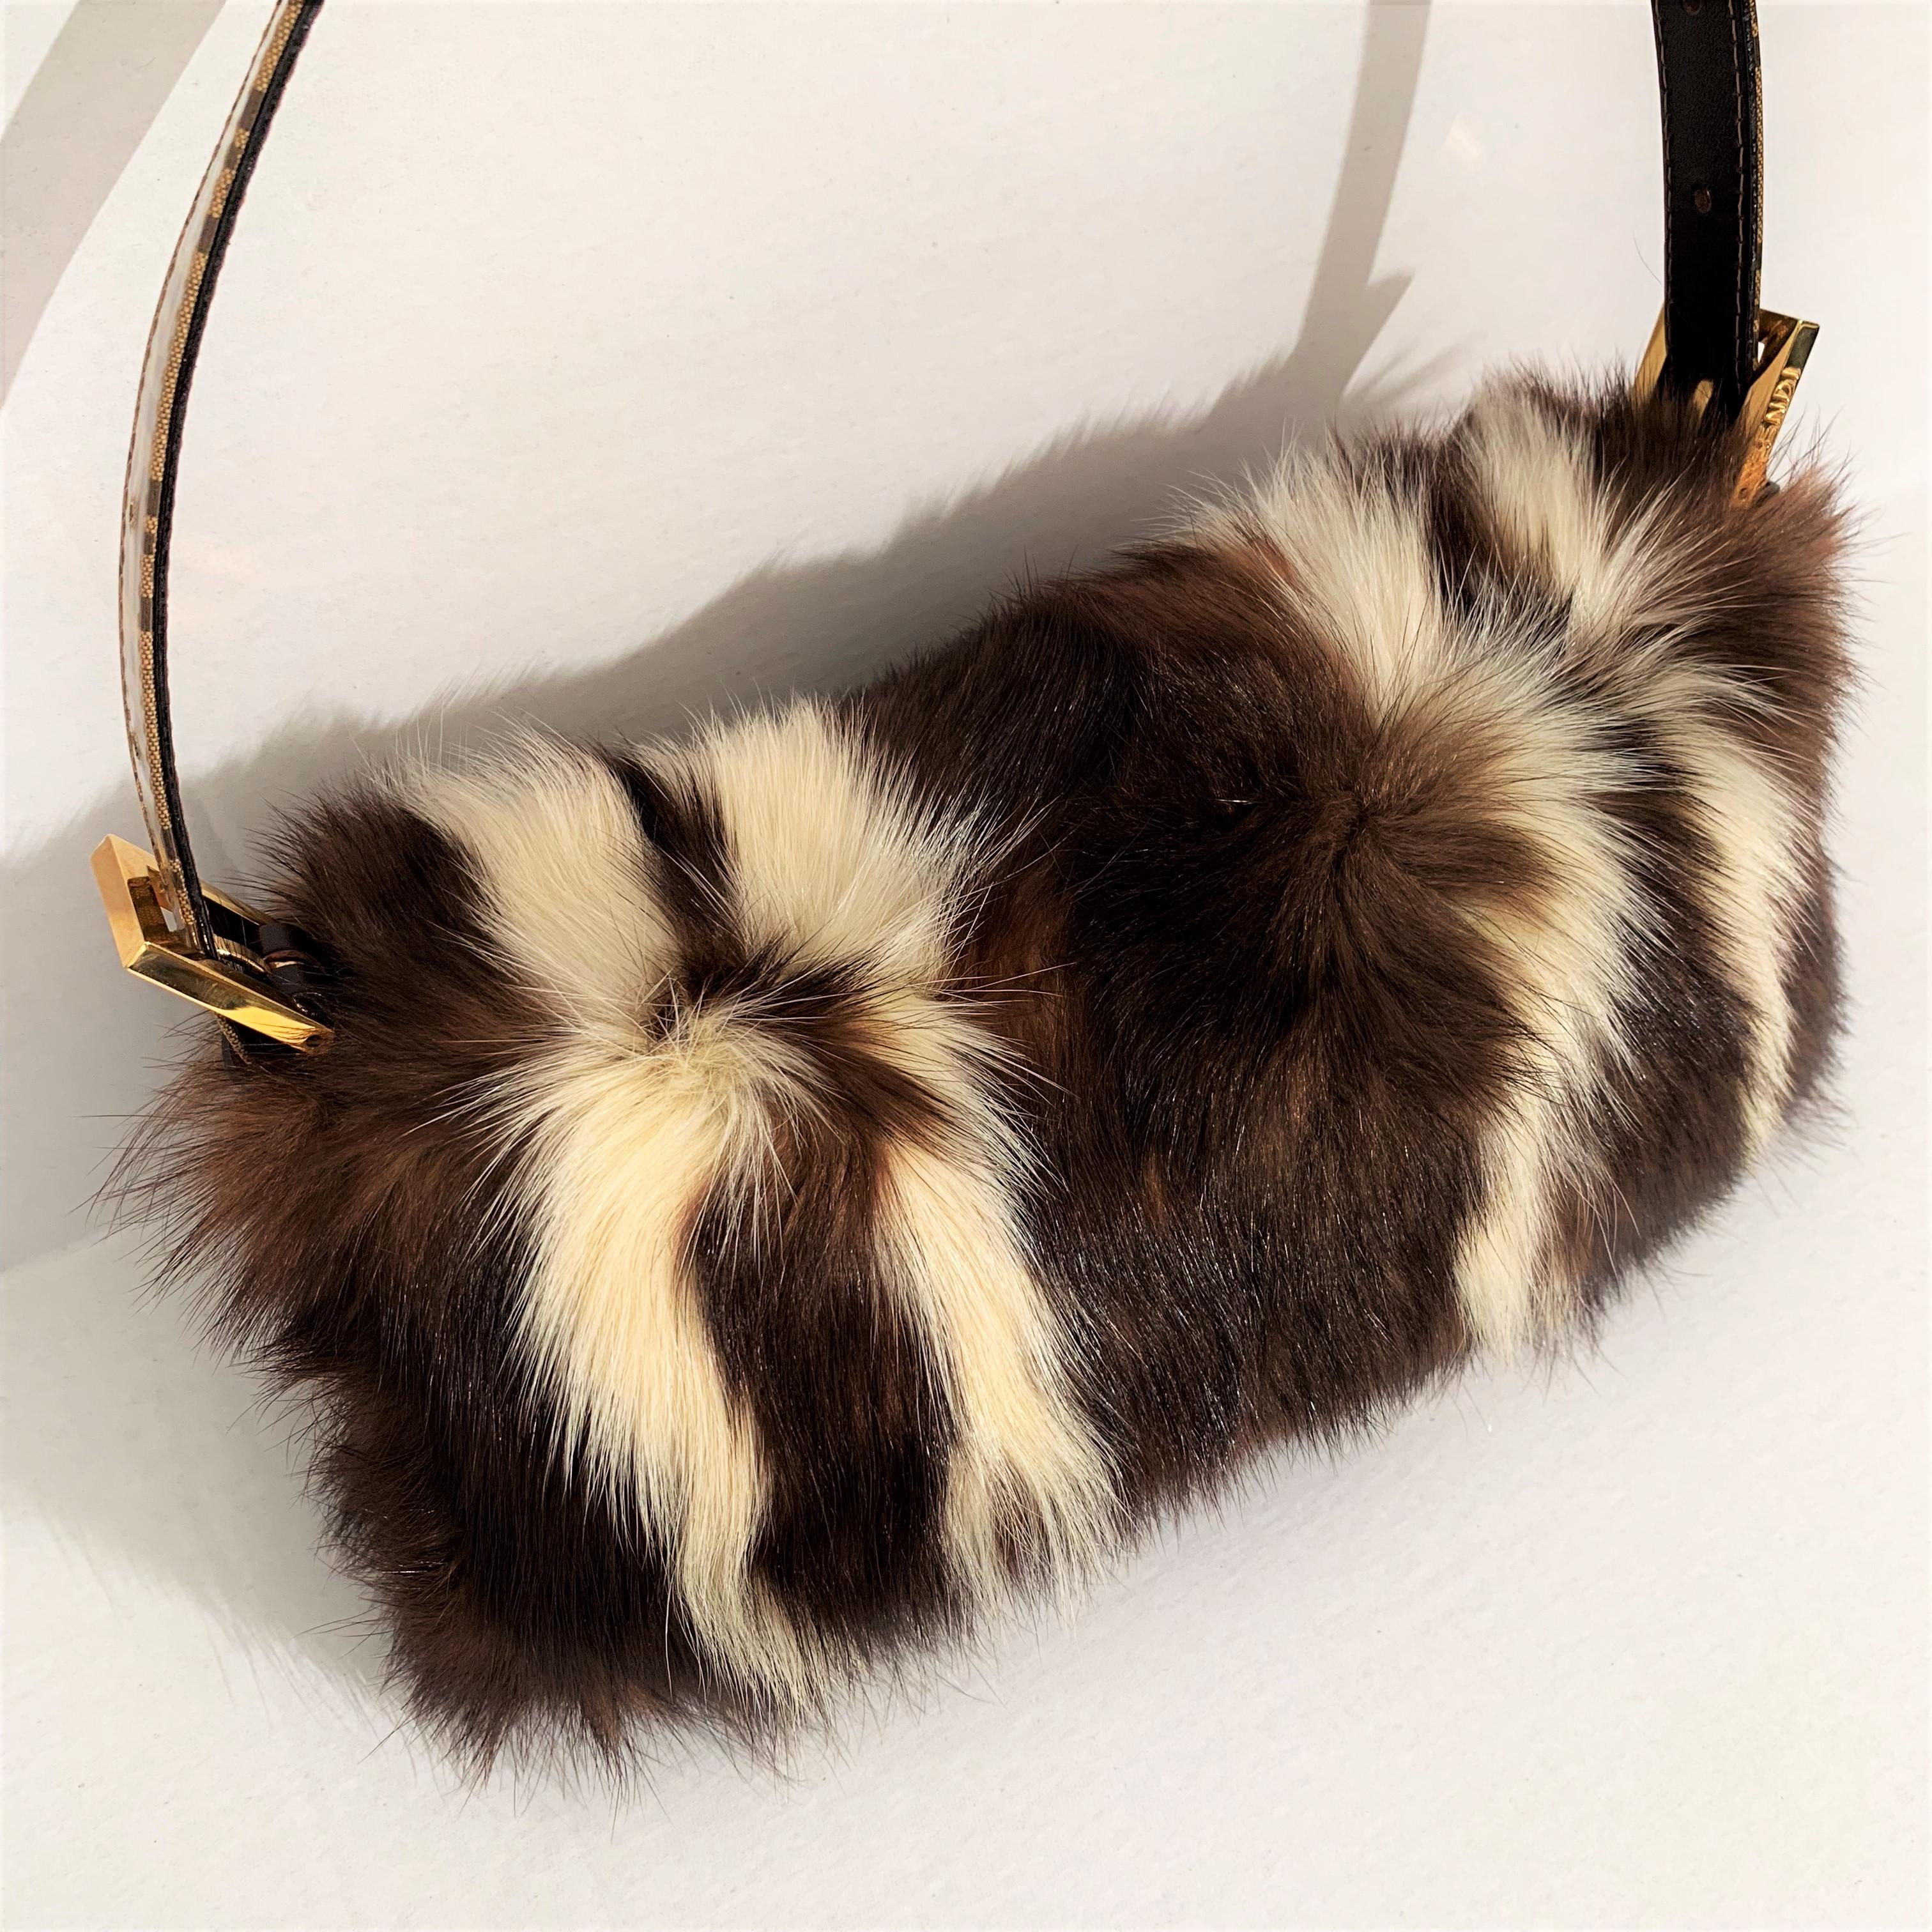 New Rare Fendi Fur Baguette Bag Featured in the 15th Anniversary Book Lt Edition 6